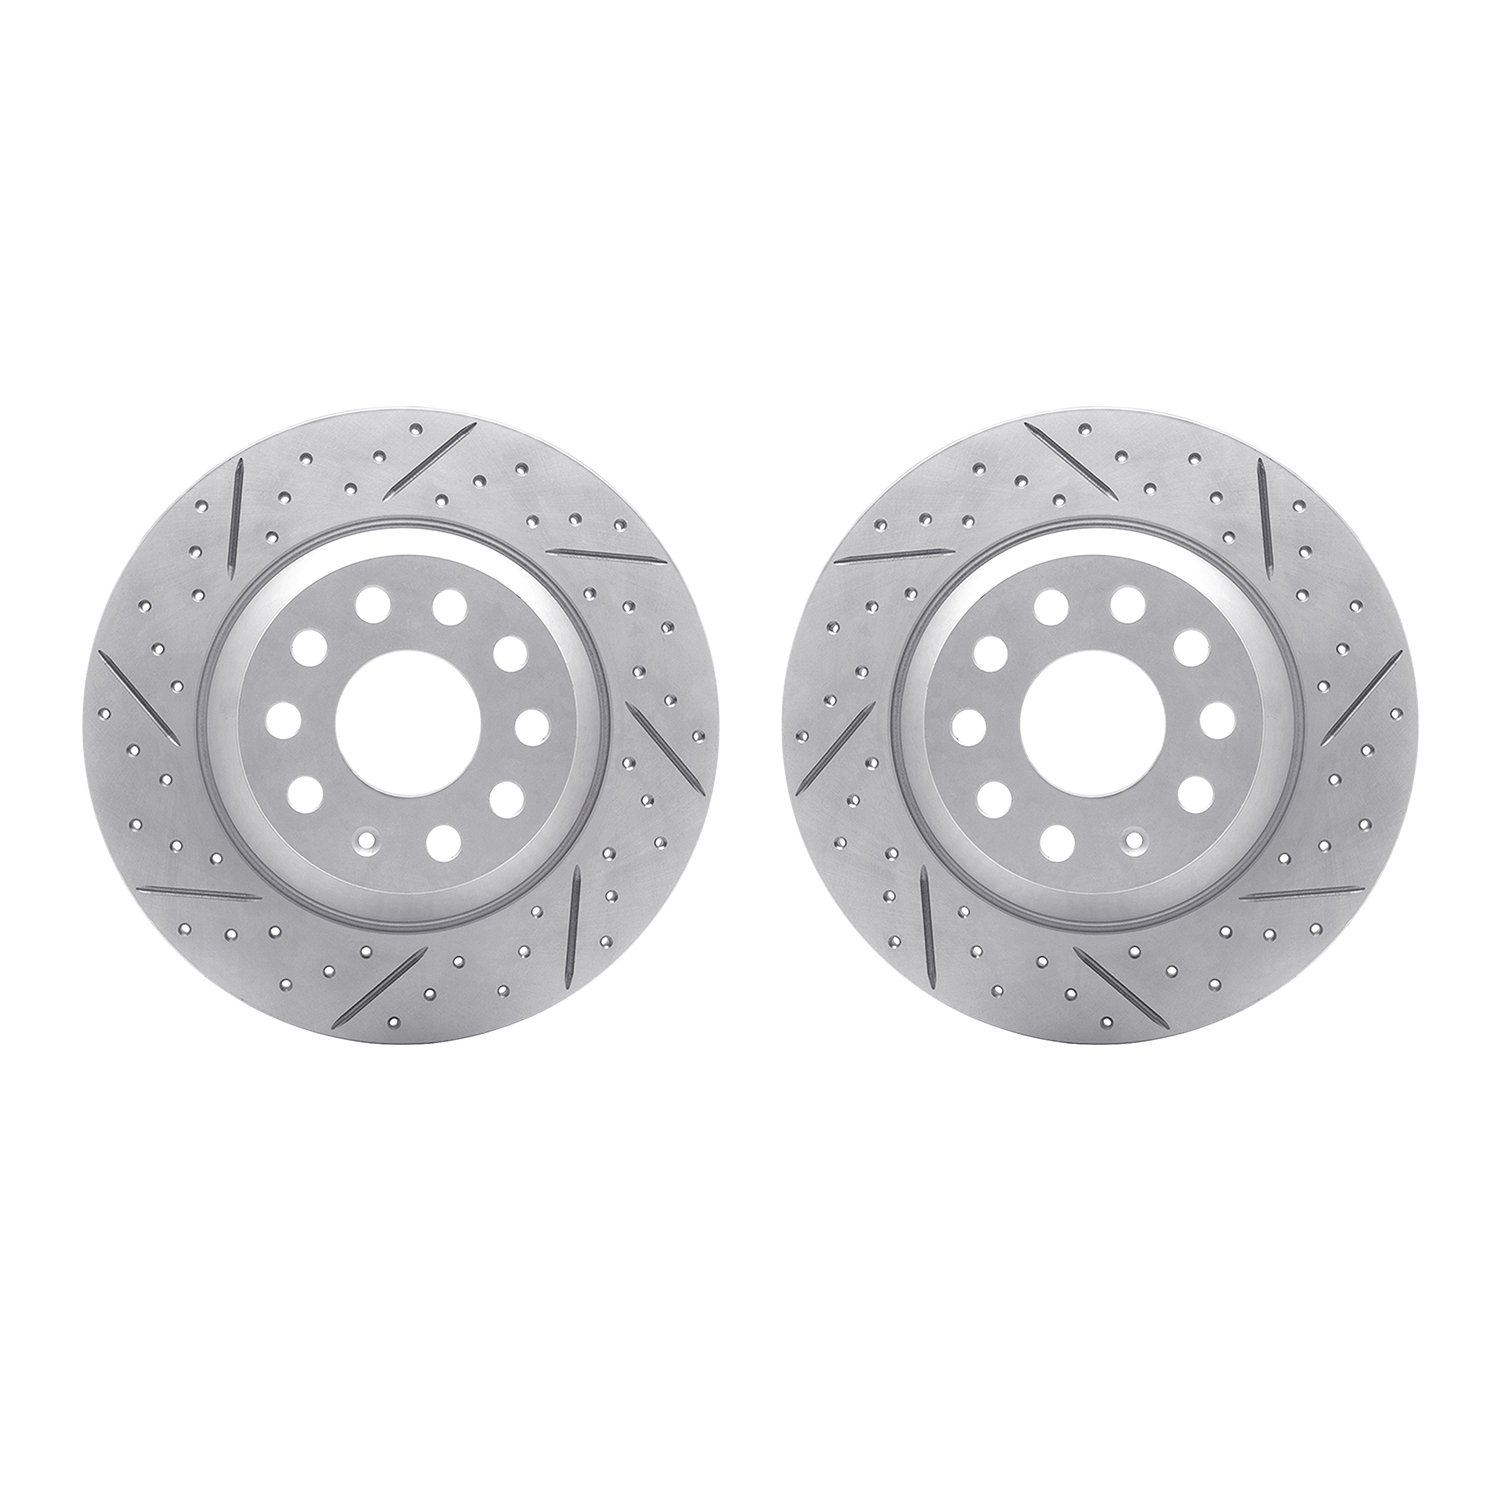 2002-73044 Geoperformance Drilled/Slotted Brake Rotors, Fits Select Audi/Volkswagen, Position: Rear